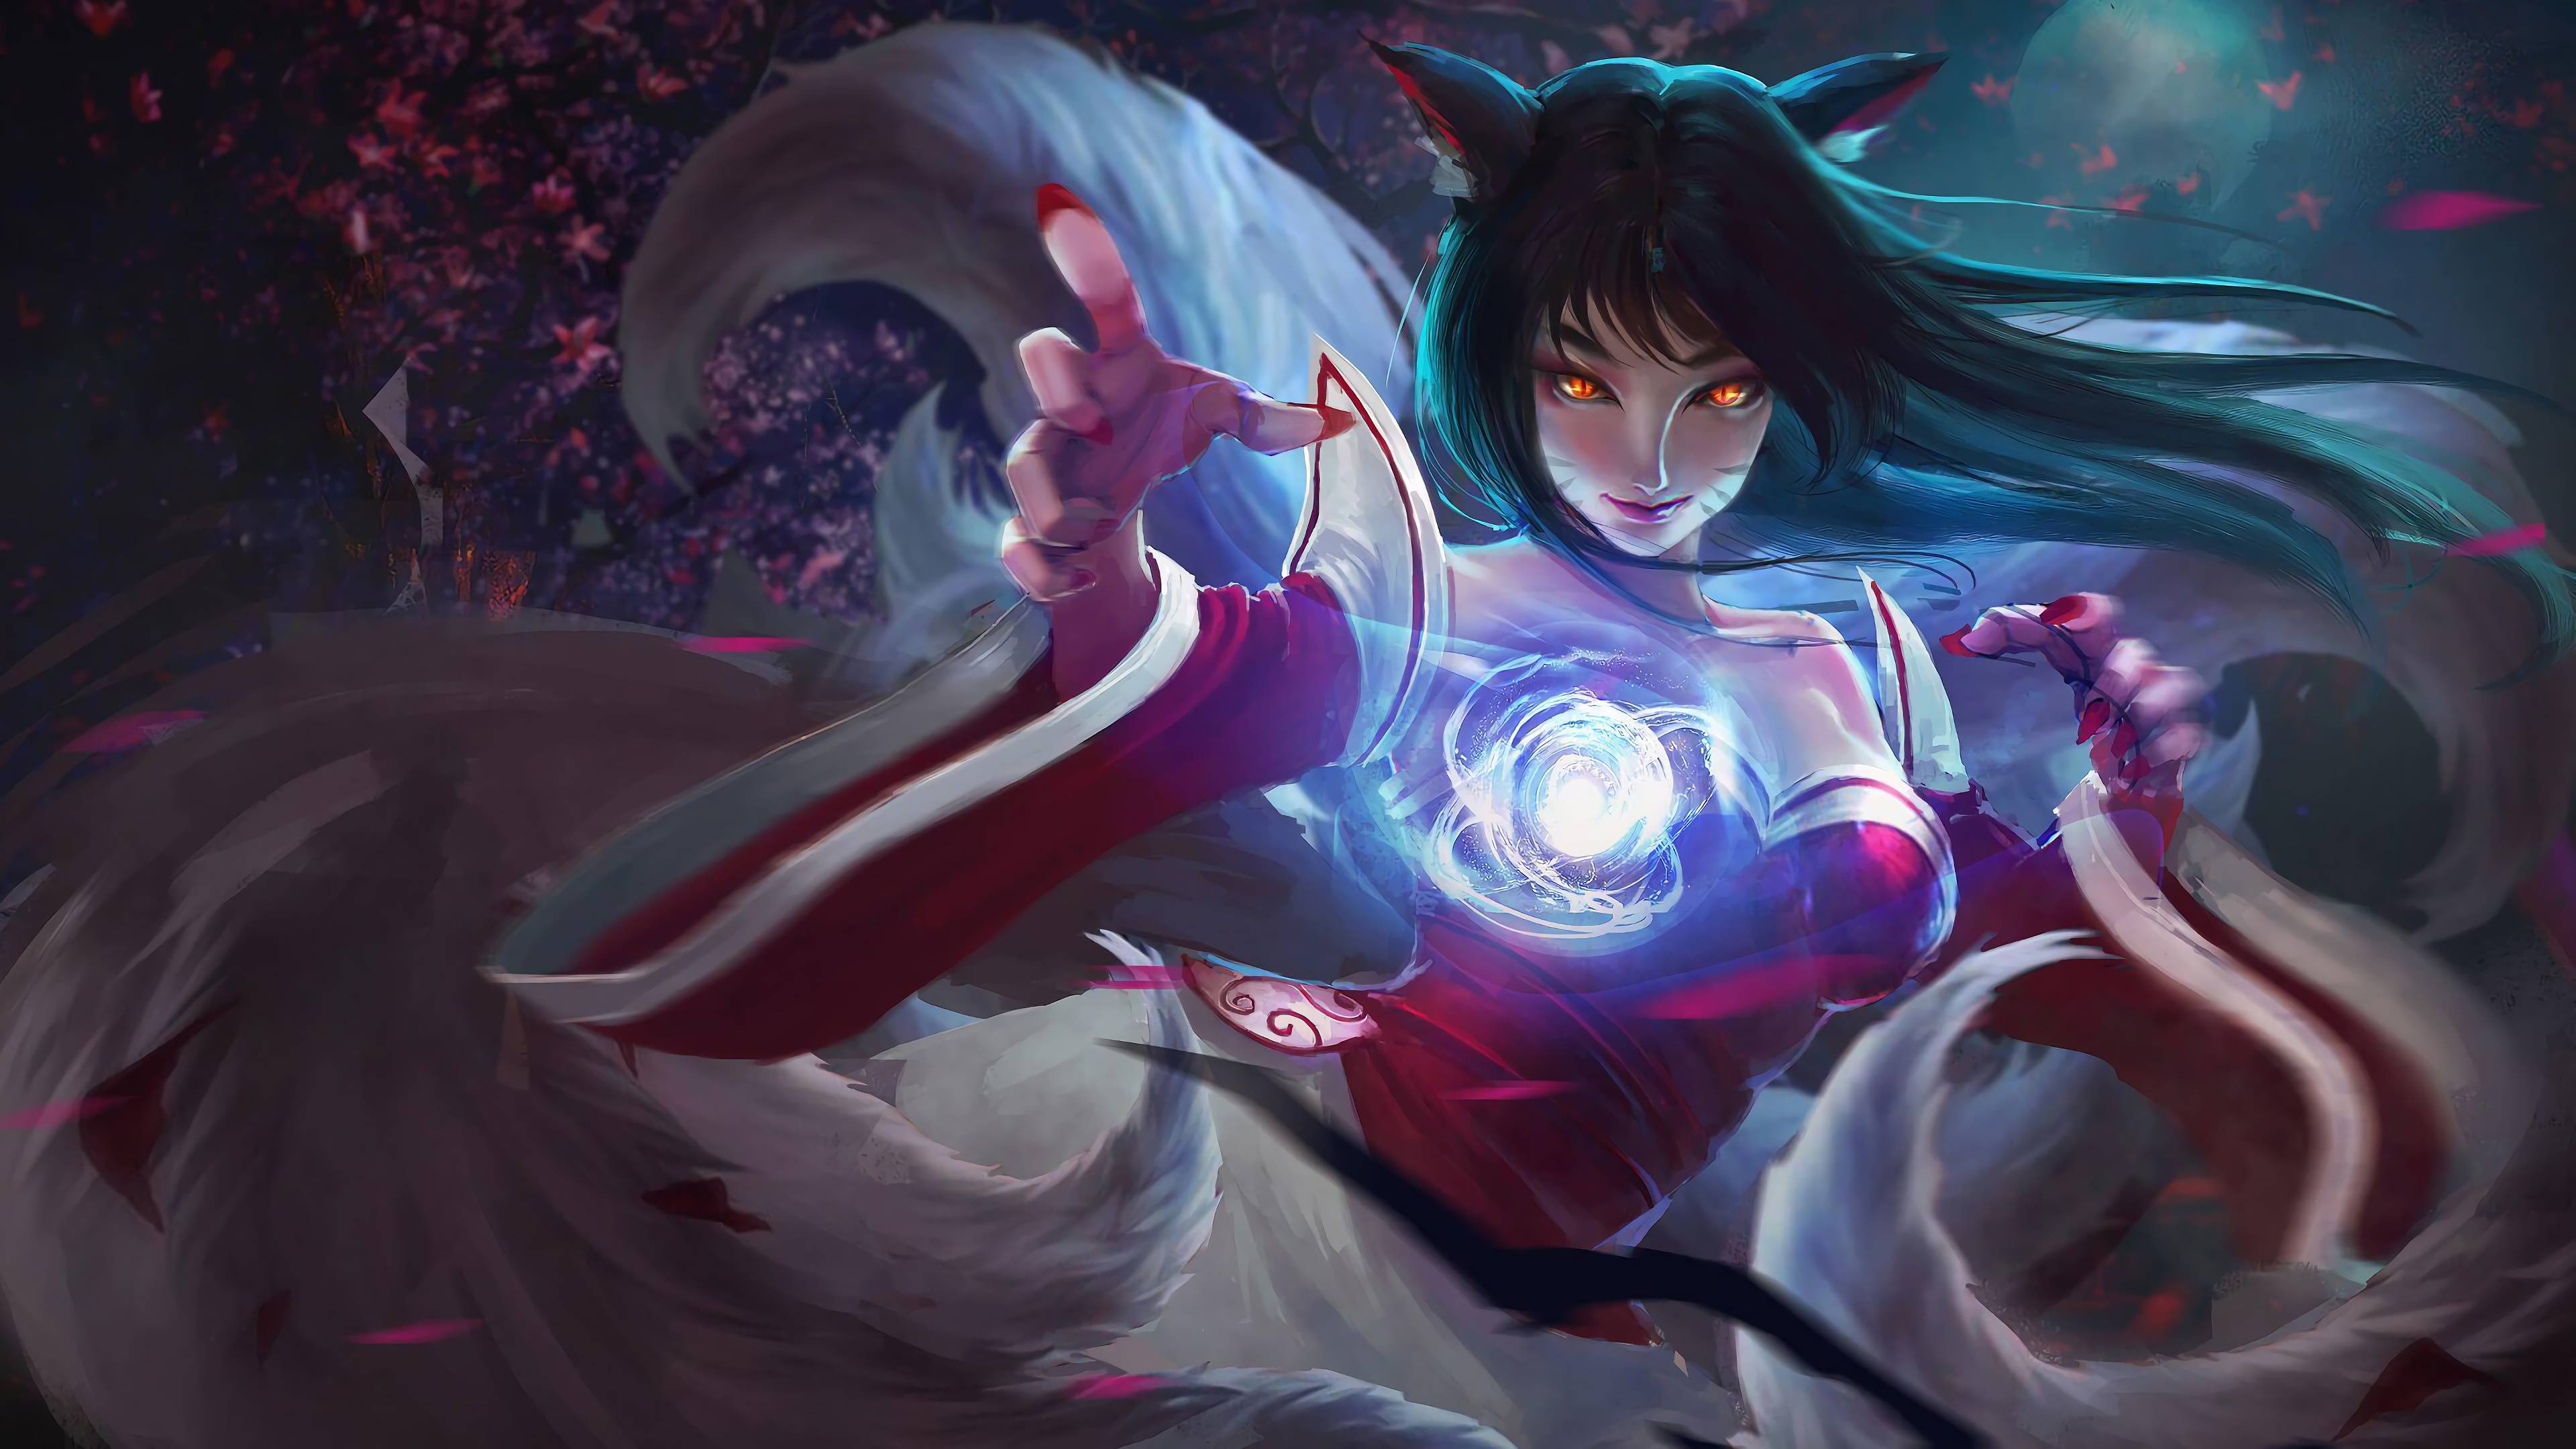 League Of Legends Ahri Wallpapers Top Free League Of Legends Ahri Backgrounds Wallpaperaccess